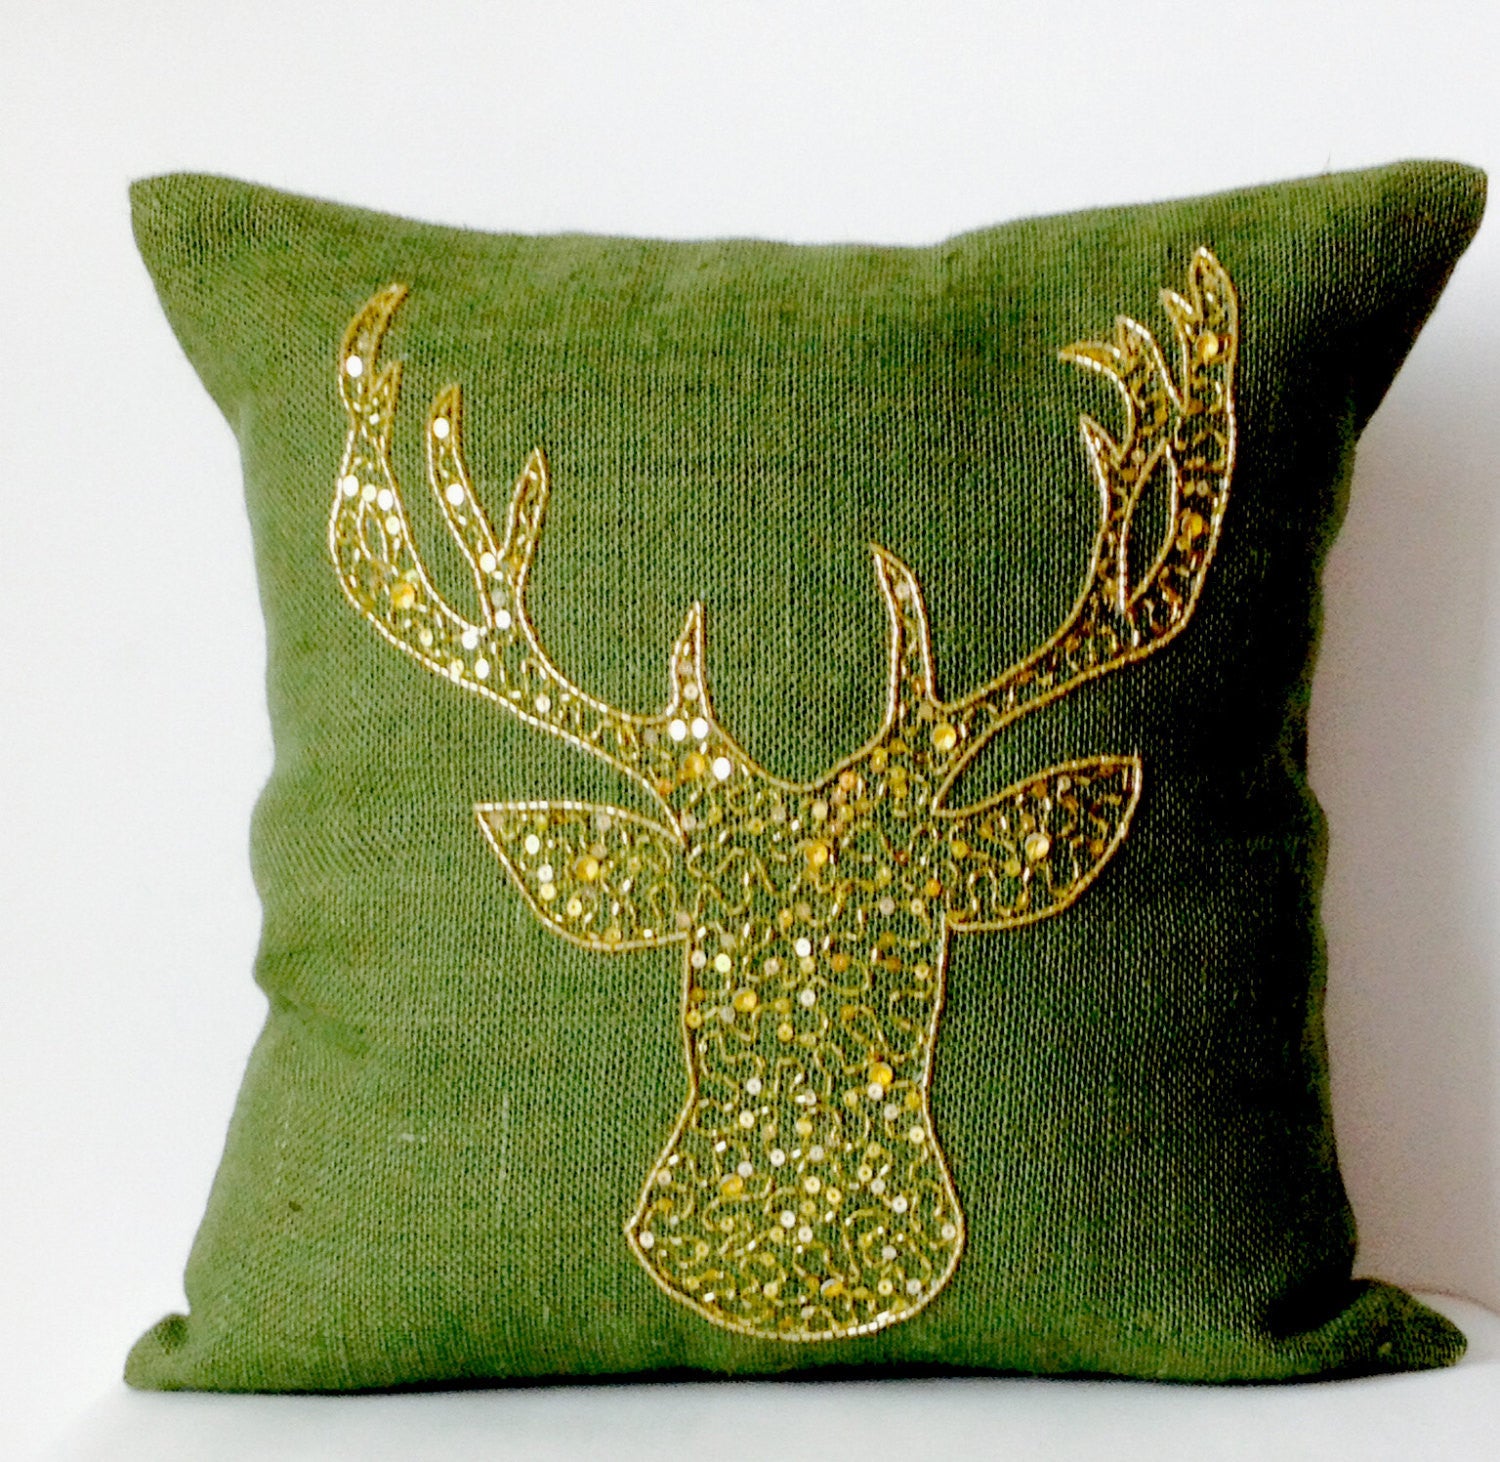 Handmade animal design pillow cover with gold sequin